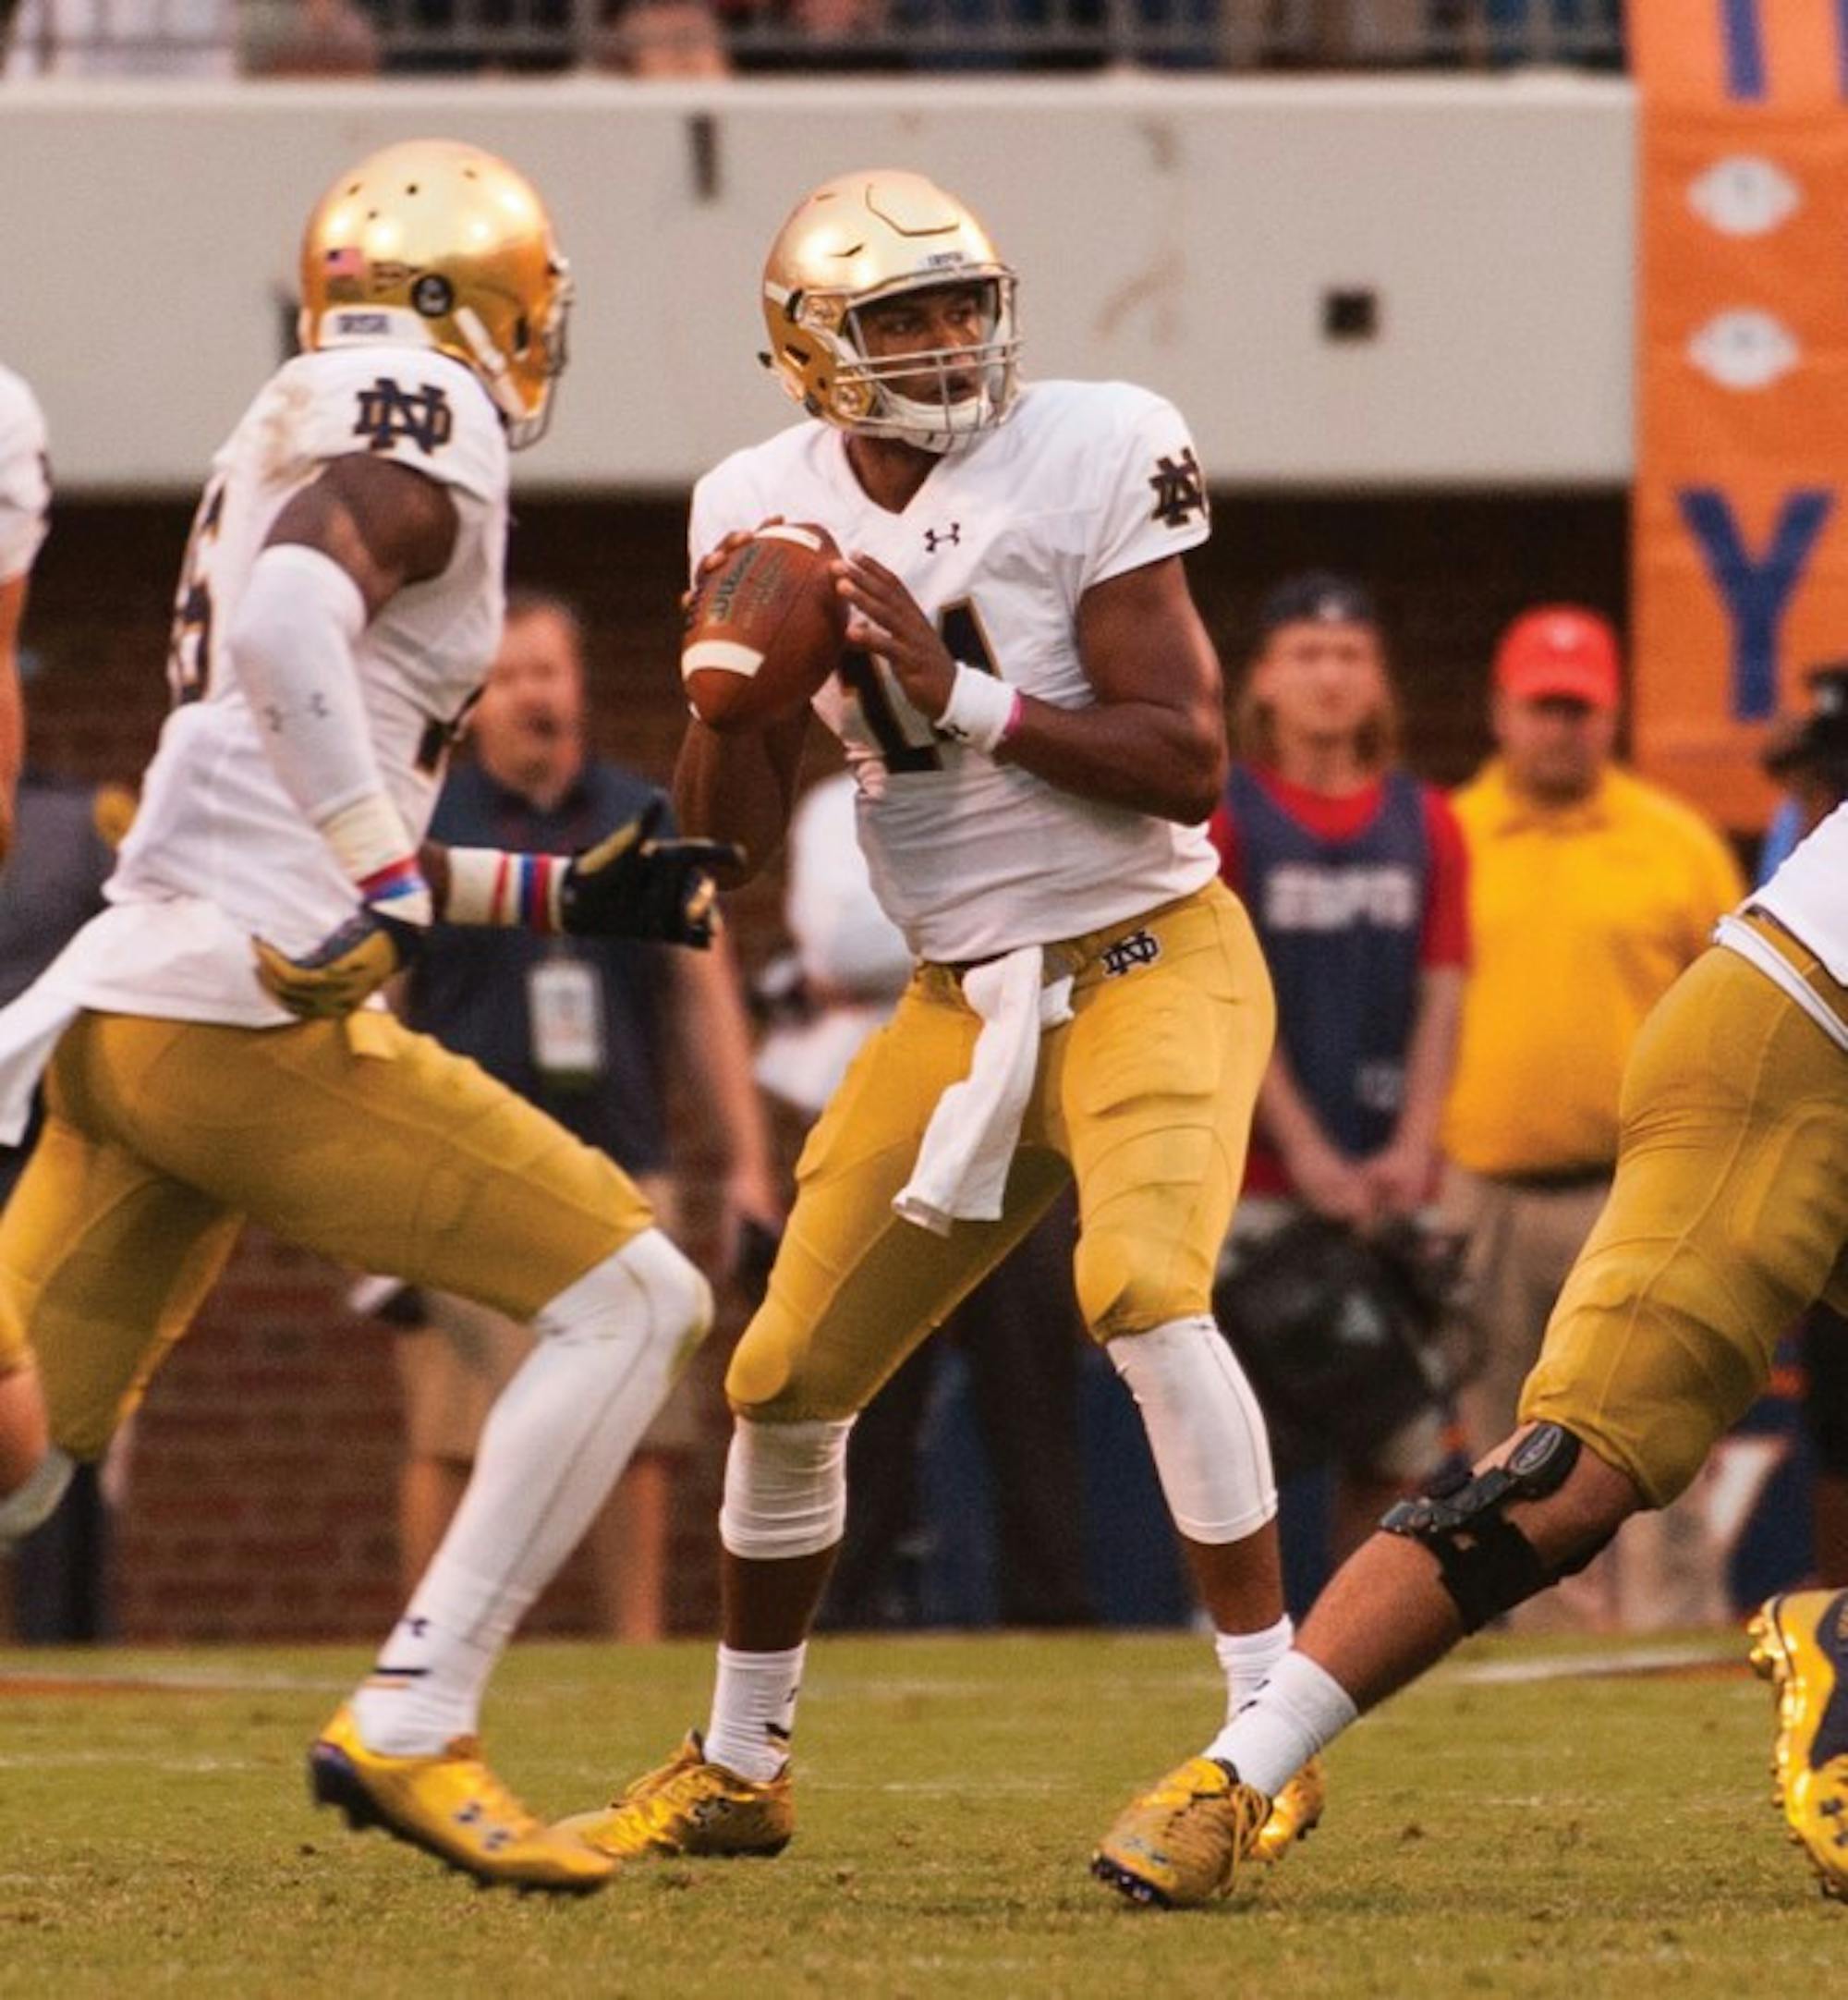 Irish quarterback DeShone Kizer drops back to pass during Notre Dame’s 34-27 win over Virginia at Scott Stadium on Saturday. The sophomore threw two touchdown passes, including the game winner.